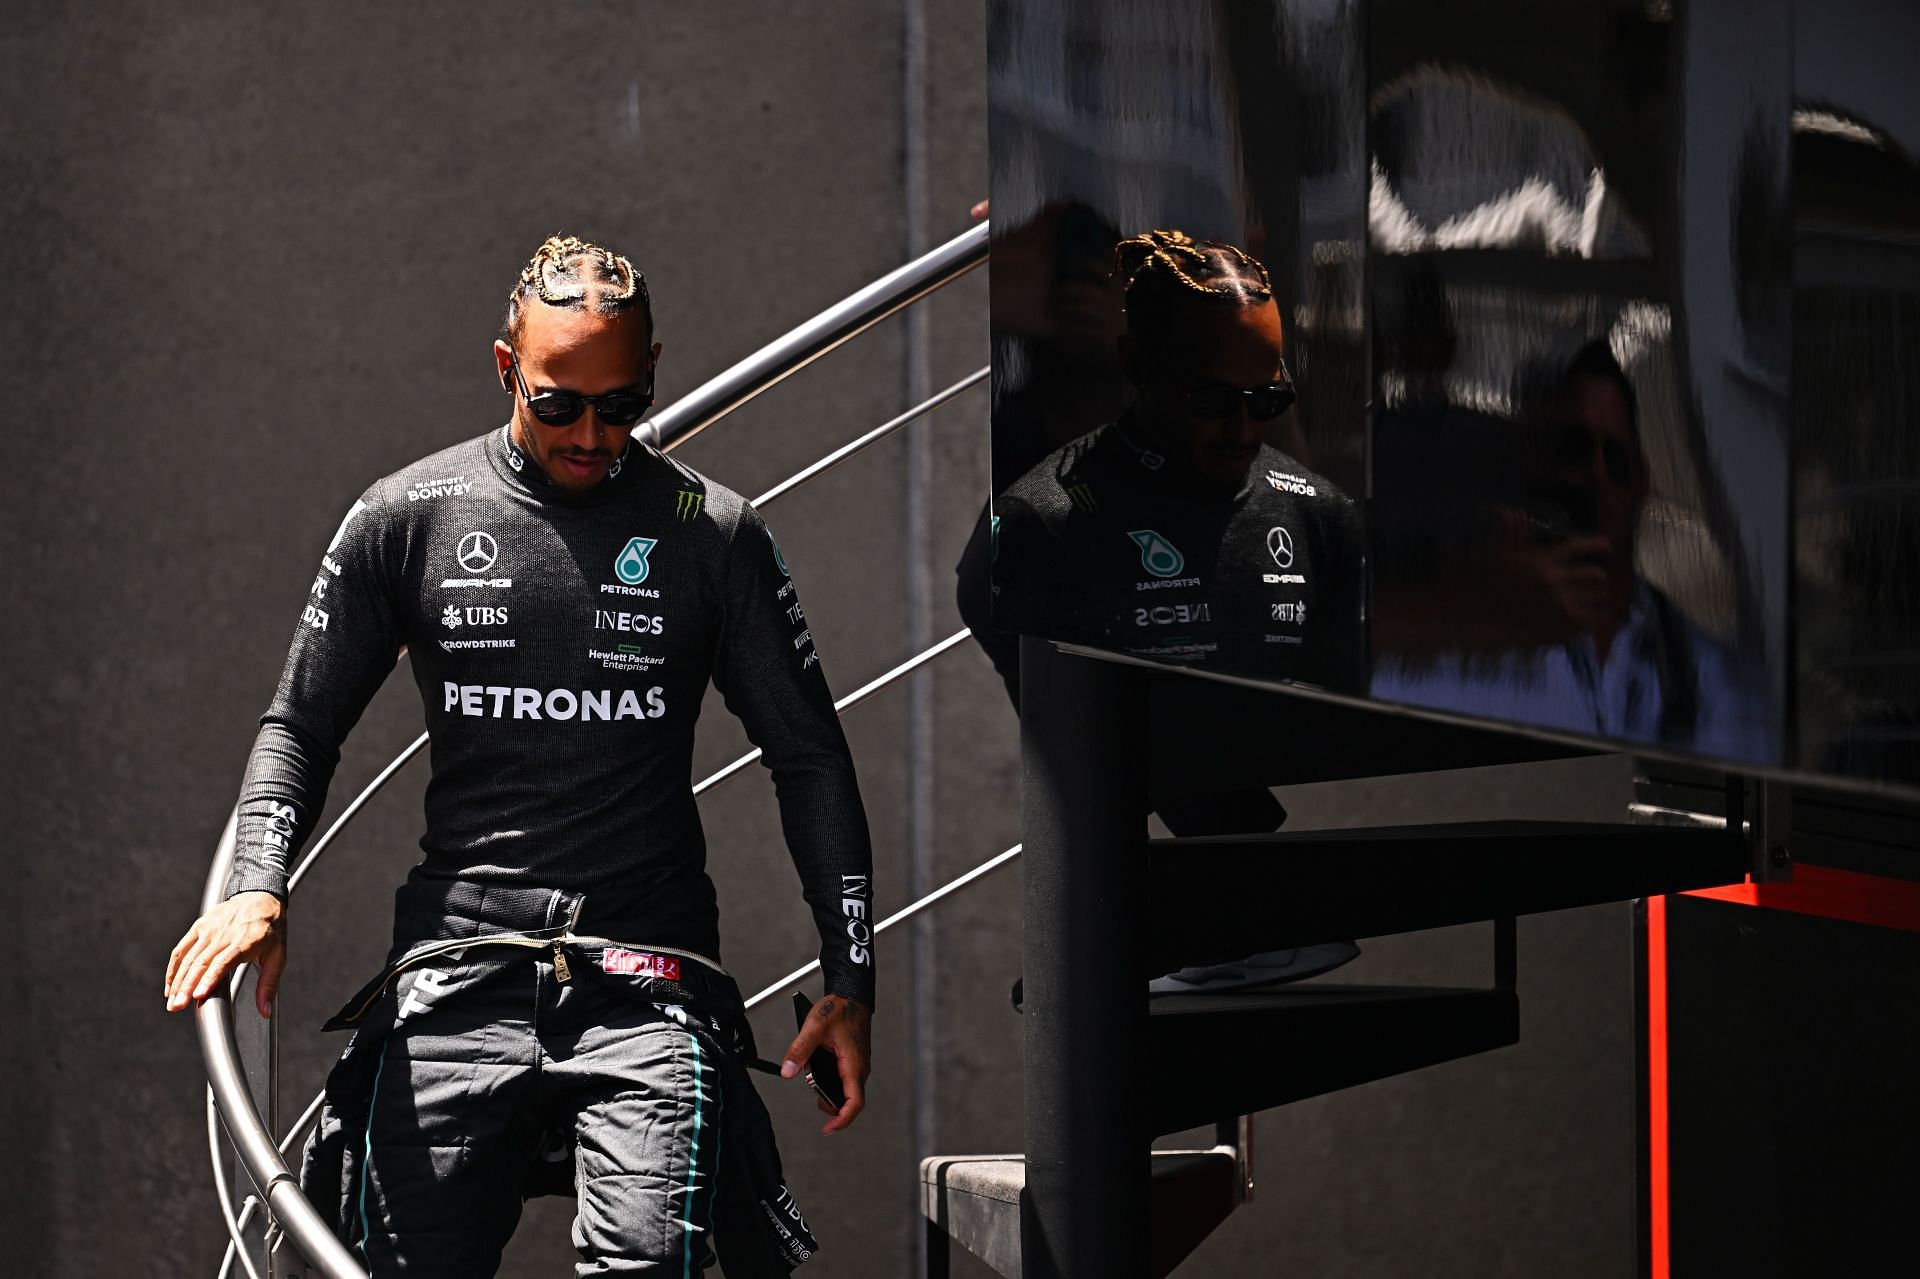 Lewis Hamilton walks in the Paddock during practice ahead of the F1 Grand Prix of Spain at Circuit de Barcelona-Catalunya on May 21, 2022 in Barcelona, Spain. (Photo by Clive Mason/Getty Images)